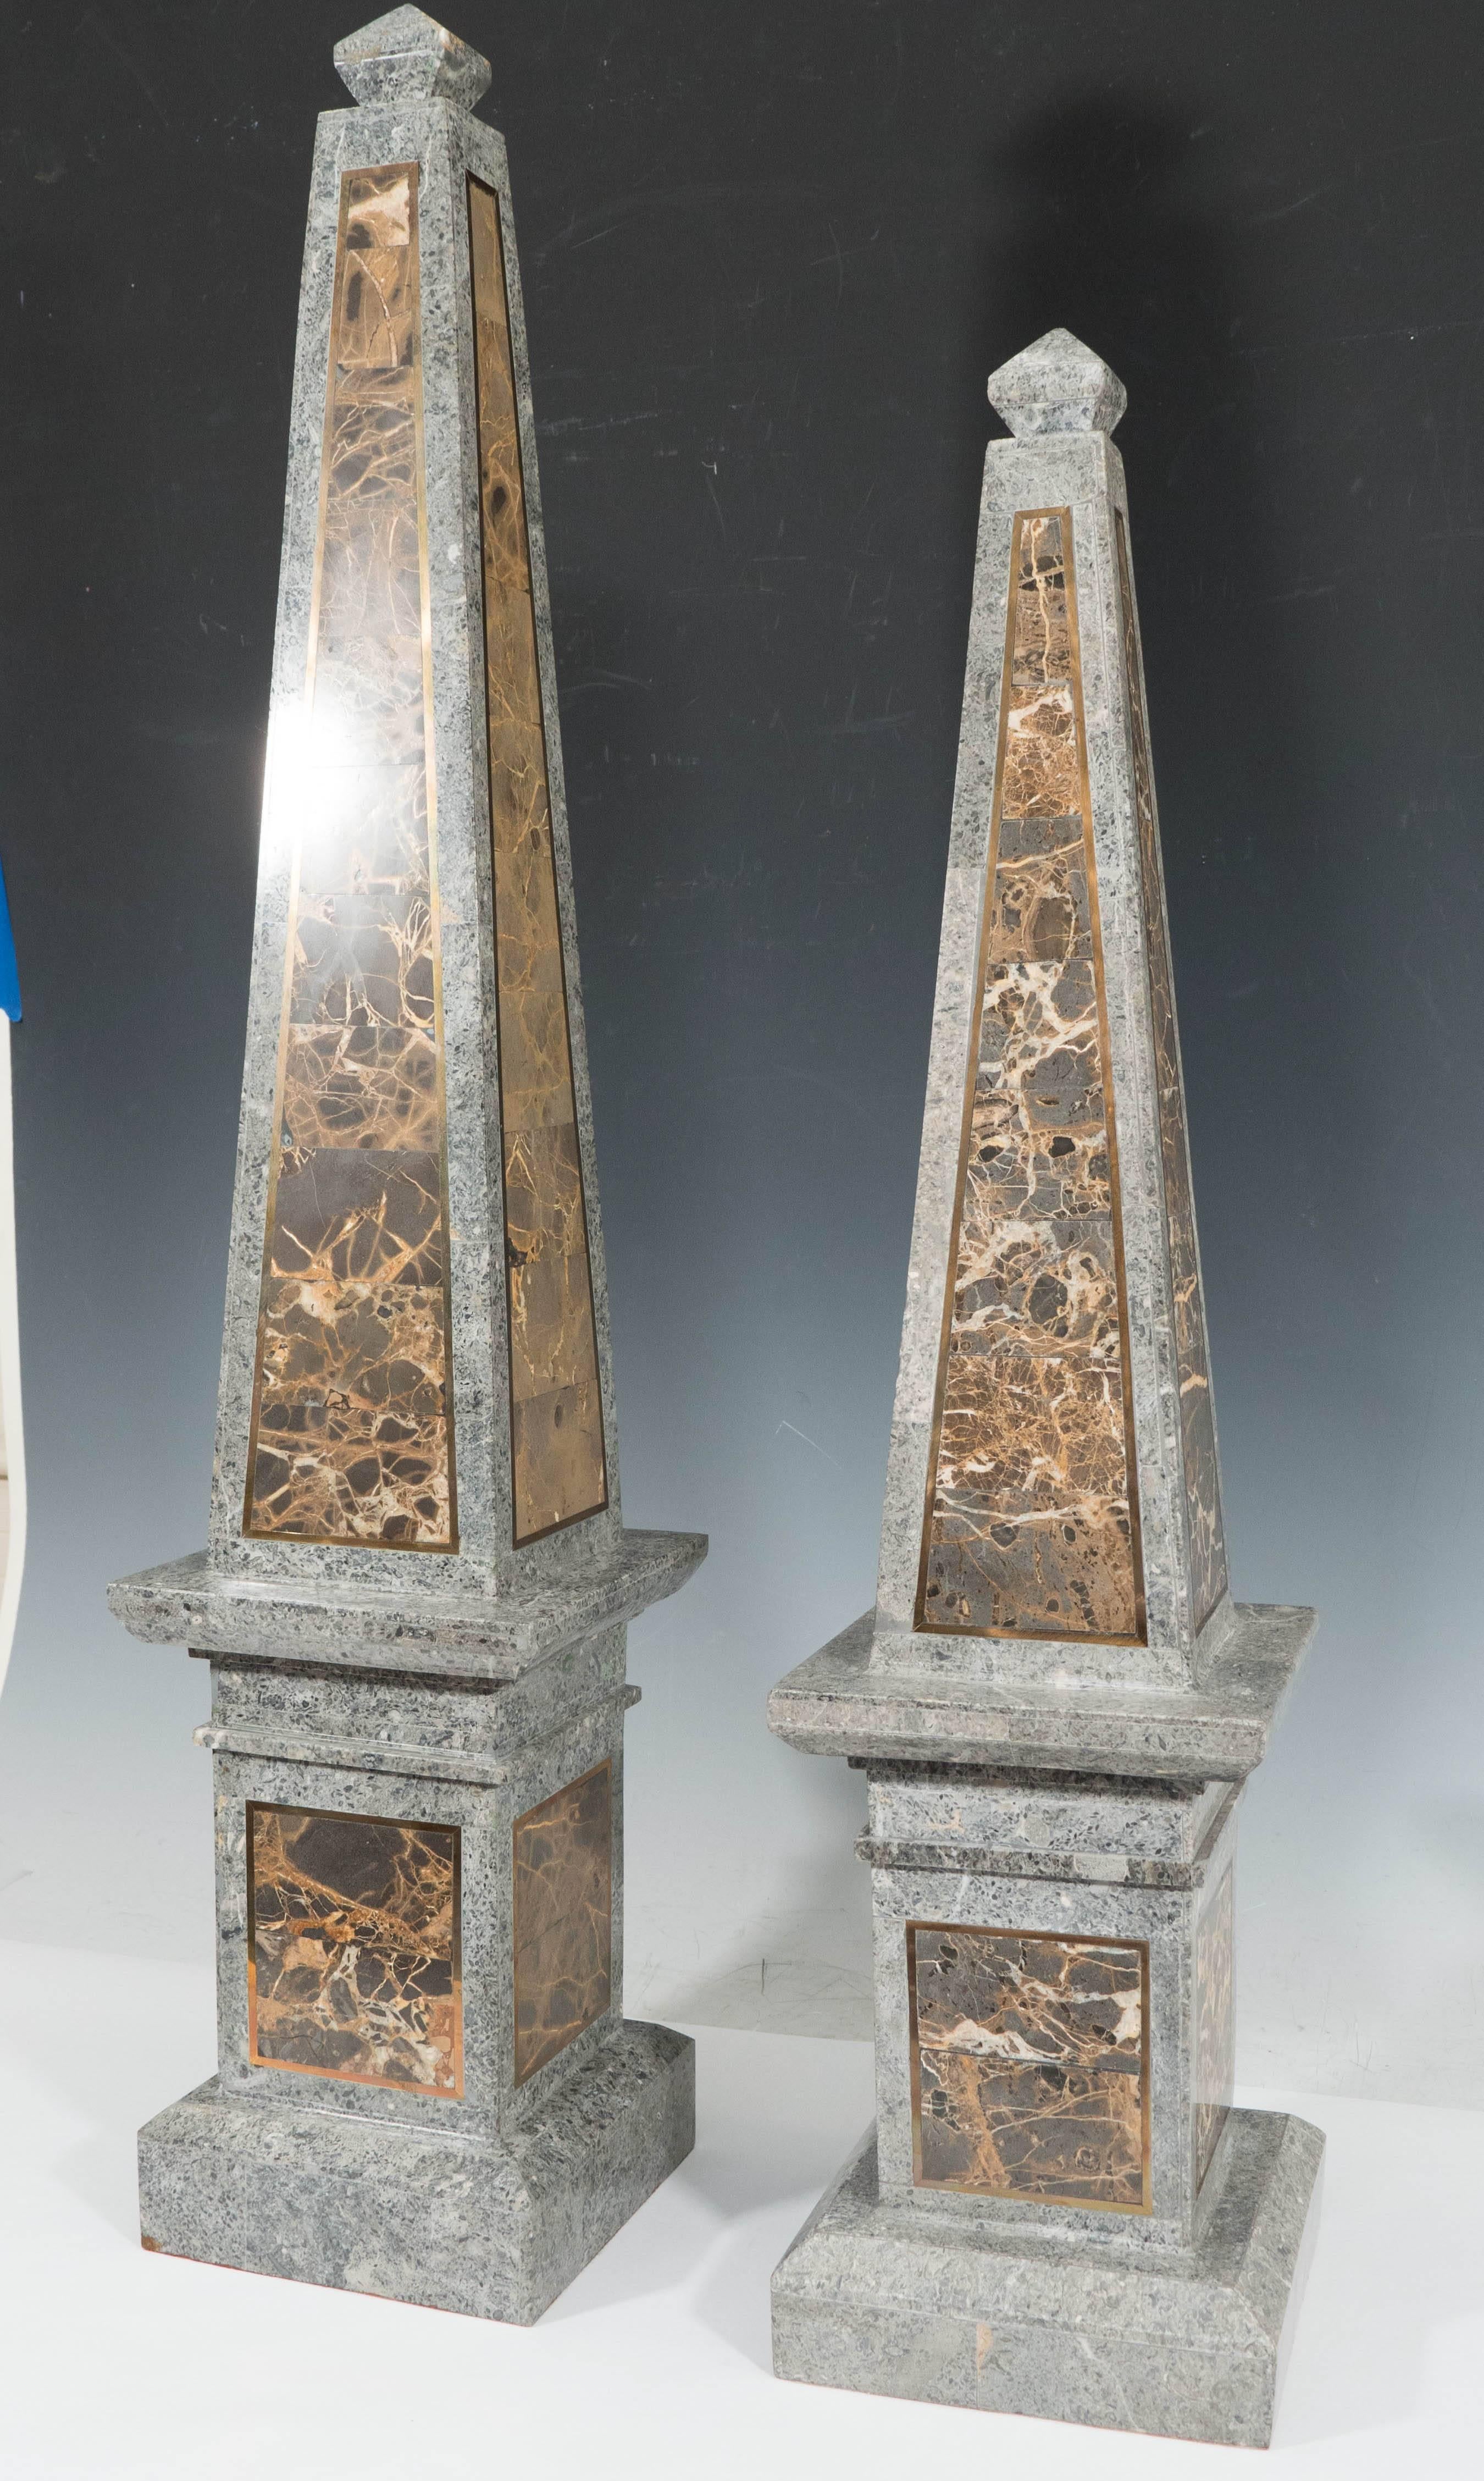 A pair of decorative obelisks of small and large proportions, produced circa 1980s by Maitland-Smith, each in gray and colored tessellated marble, surmounted by diamond form finial. The obelisks are in excellent condition, consistent with age and